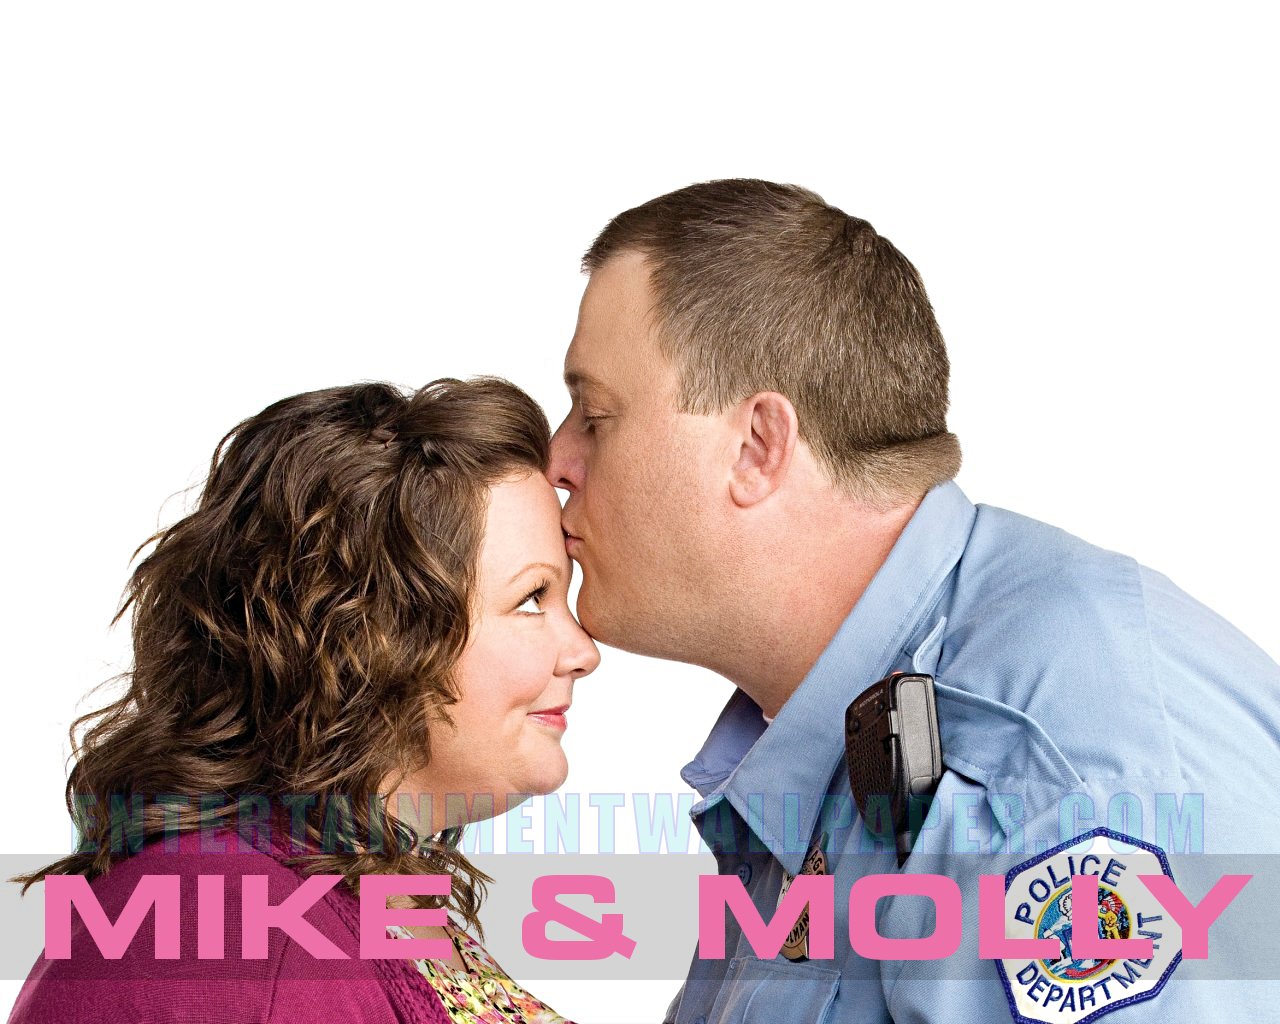 MIKE & MOLLY